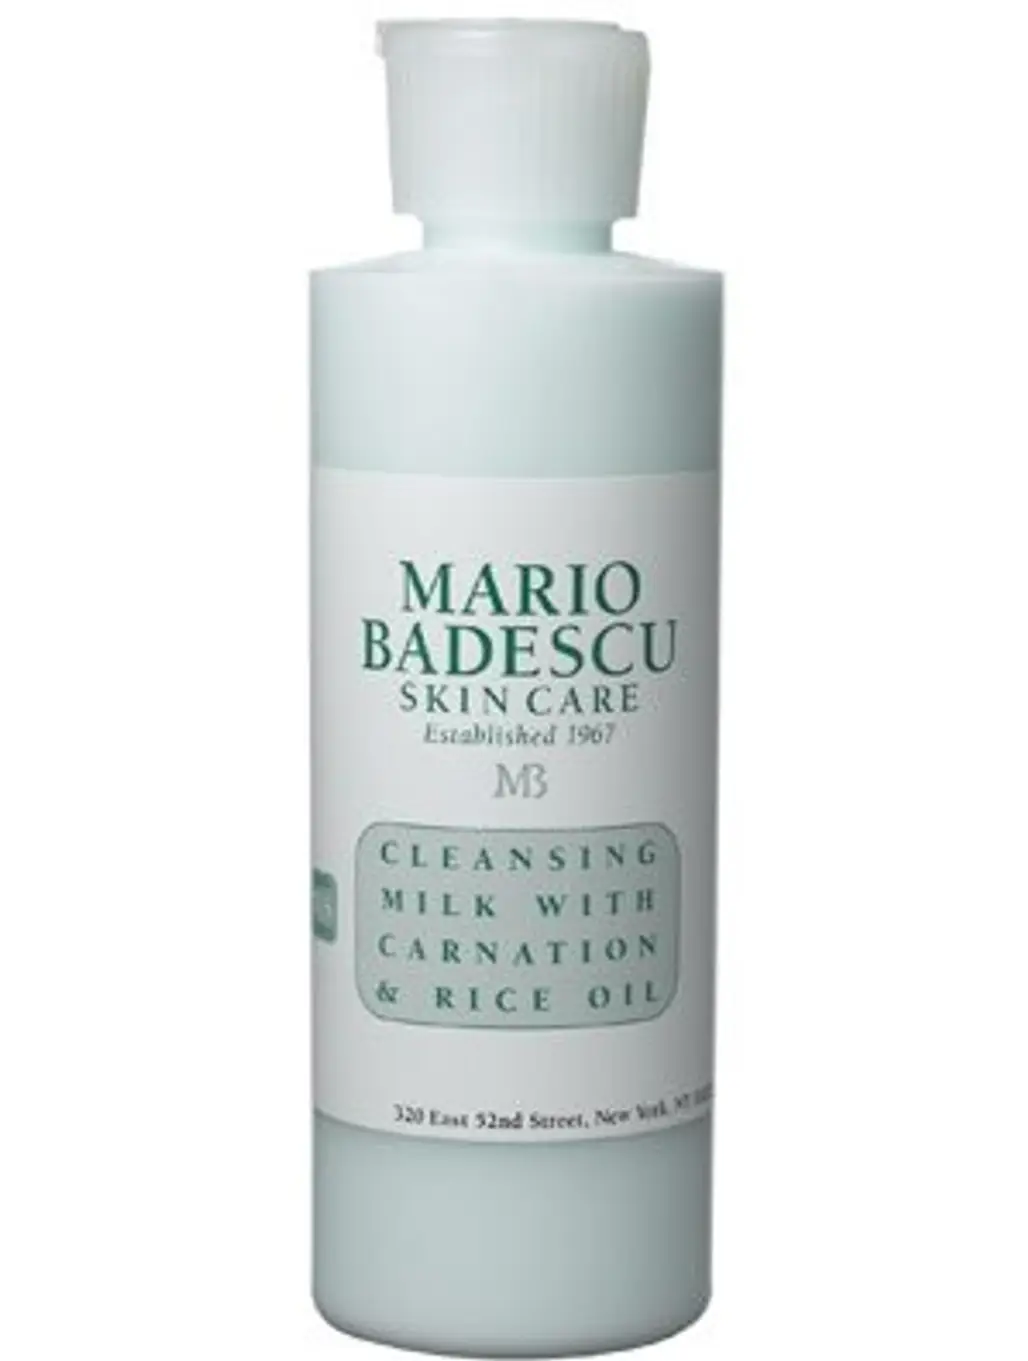 Mario Badescu – Cleansing Milk with Carnation & Rice Oil